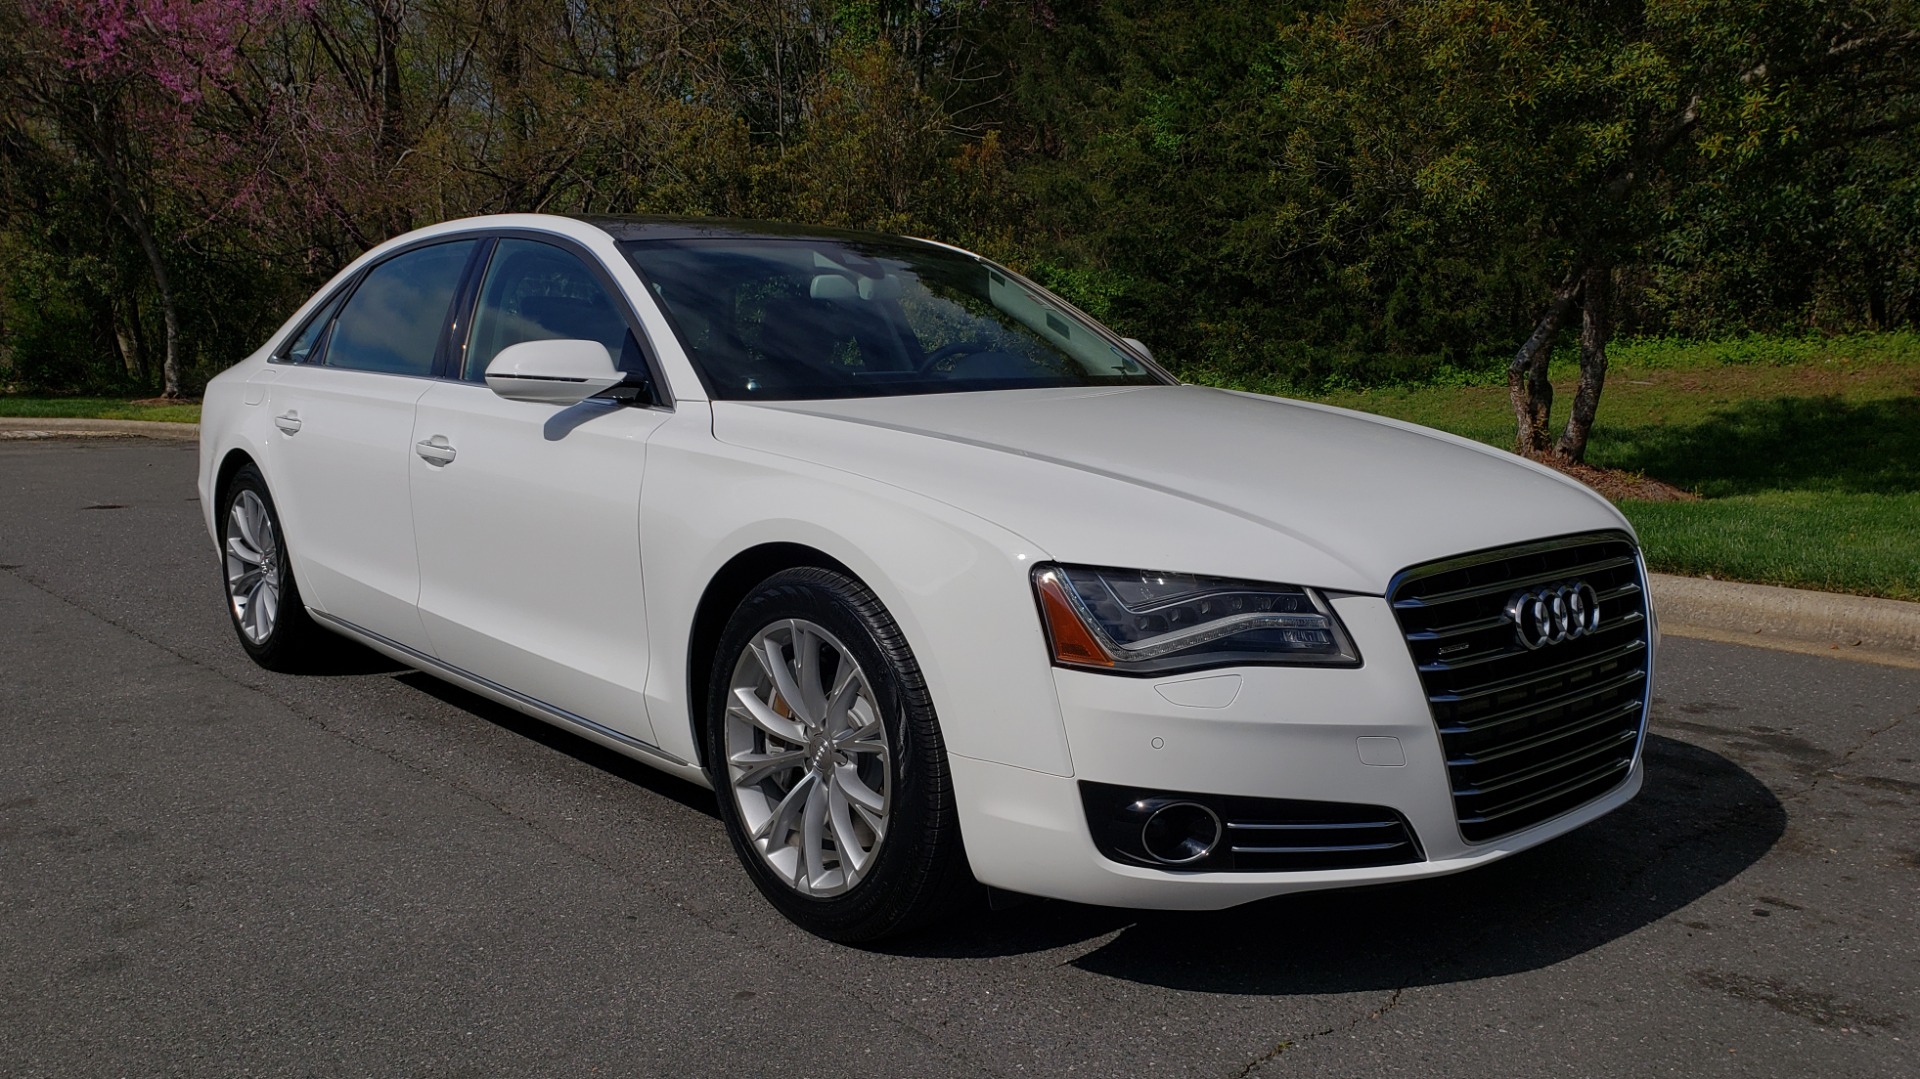 Used 2011 Audi A8 L QUATTRO / NAV / PANO-ROOF / REARVIEW / BSM / B&O SND for sale Sold at Formula Imports in Charlotte NC 28227 4